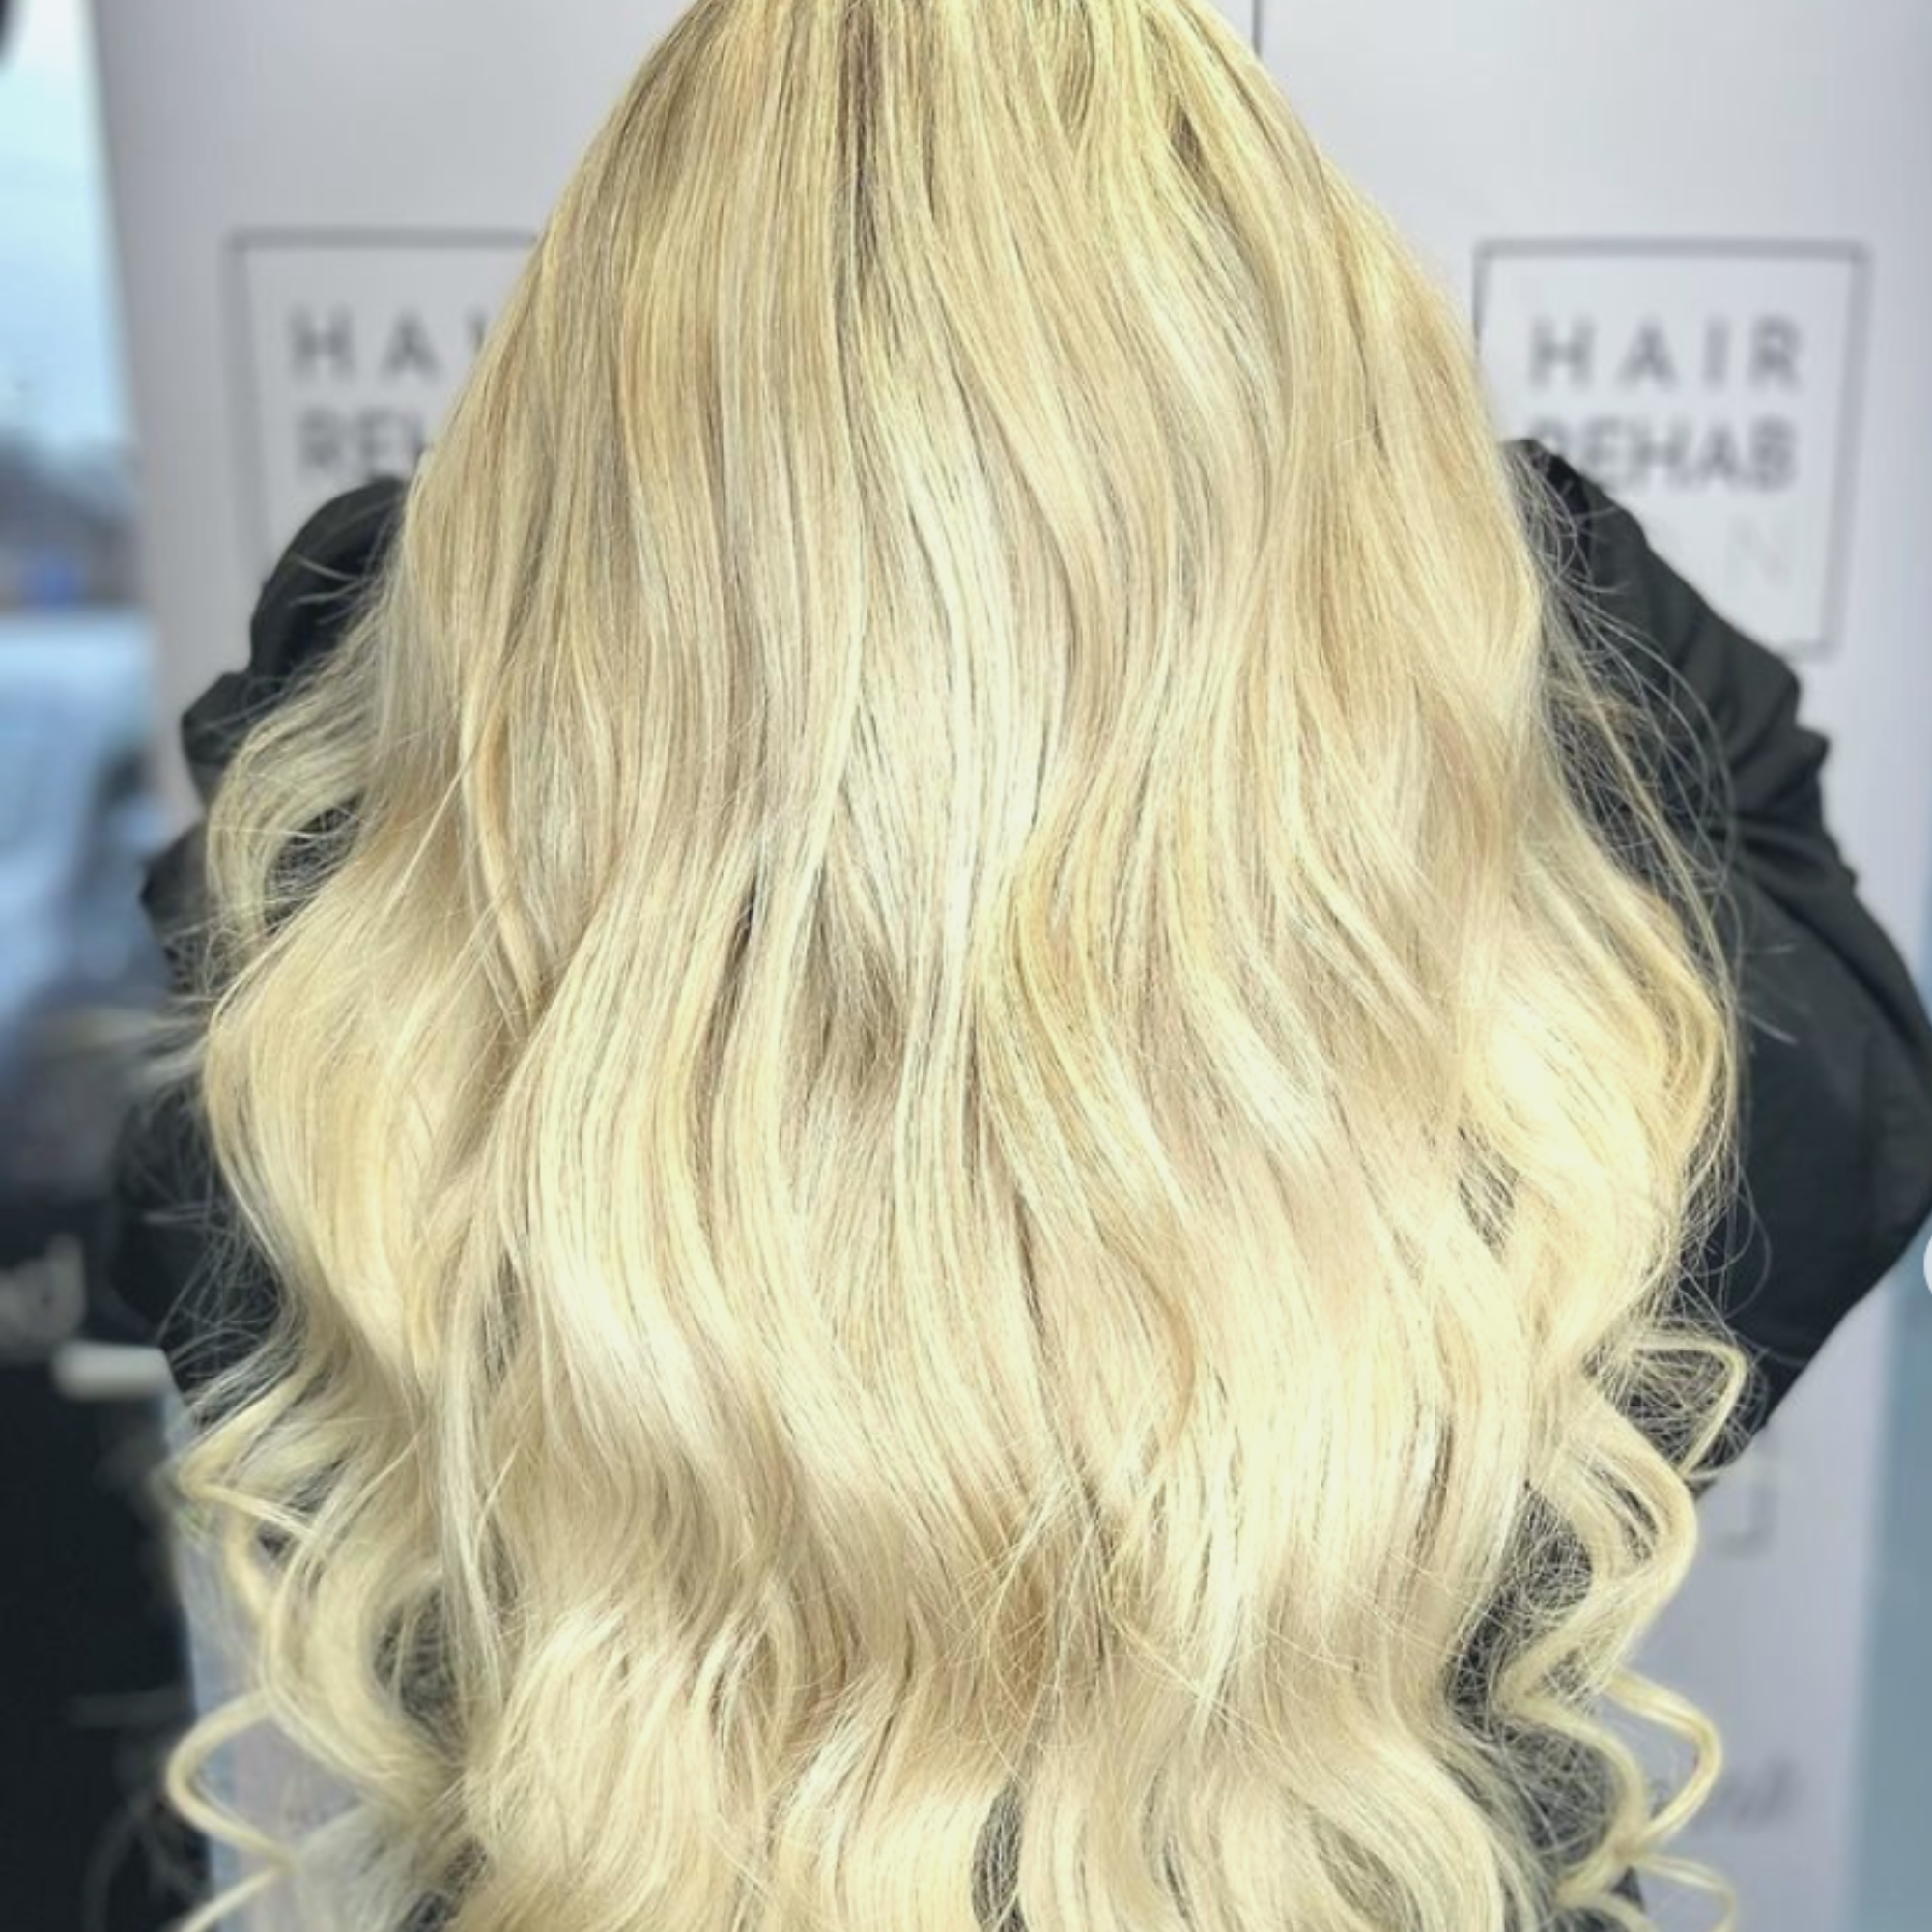 "customer wearing hair rehab london 20 inch luxe clip-in hair extensions in blonde shade"